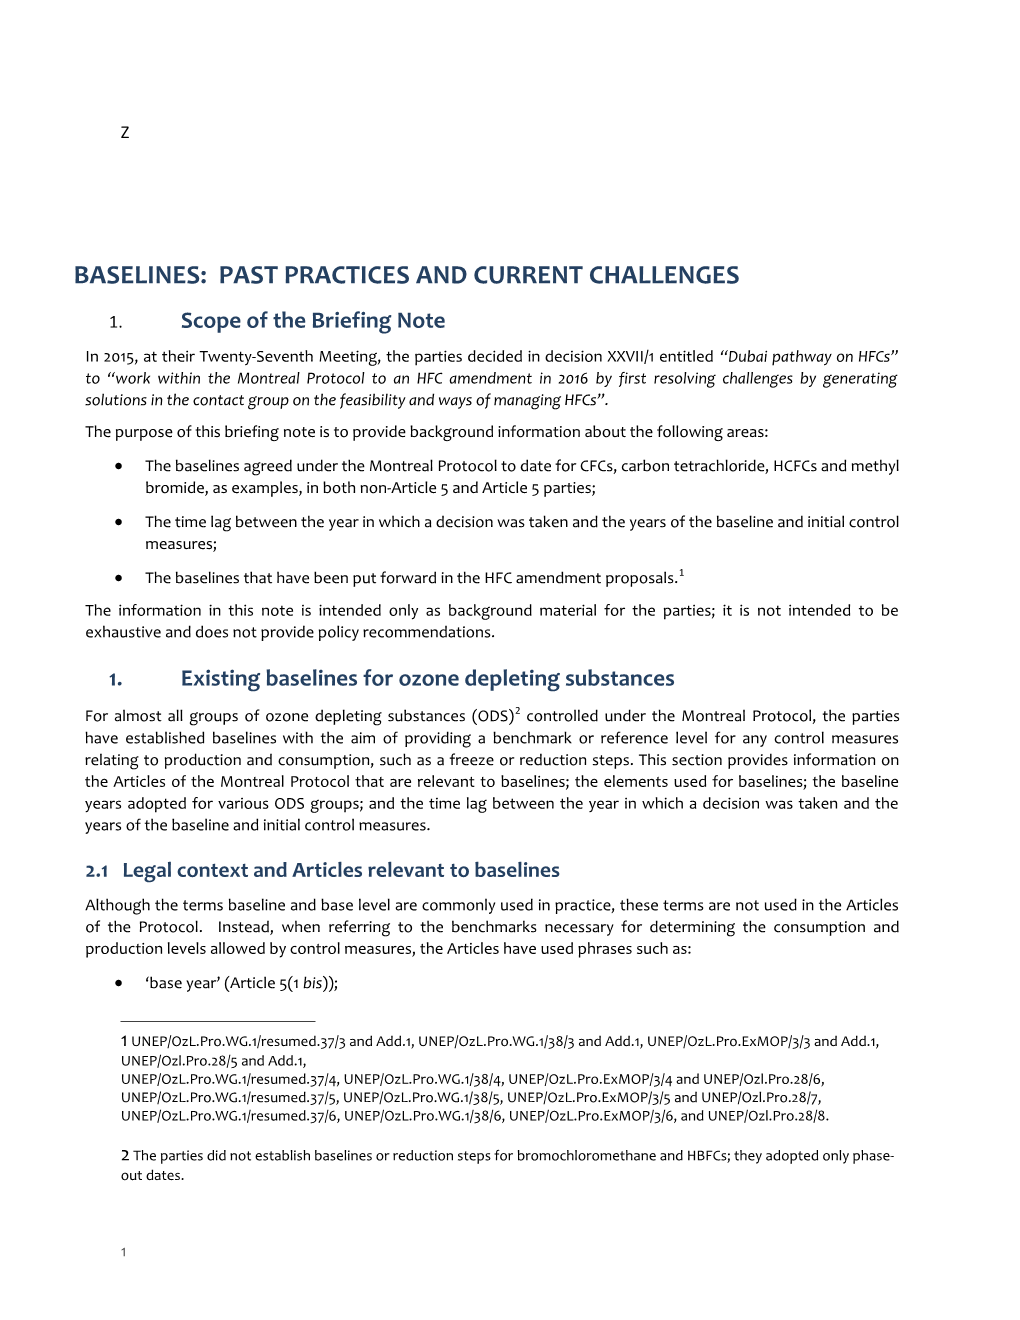 Baselines: Past Practices and Current Challenges